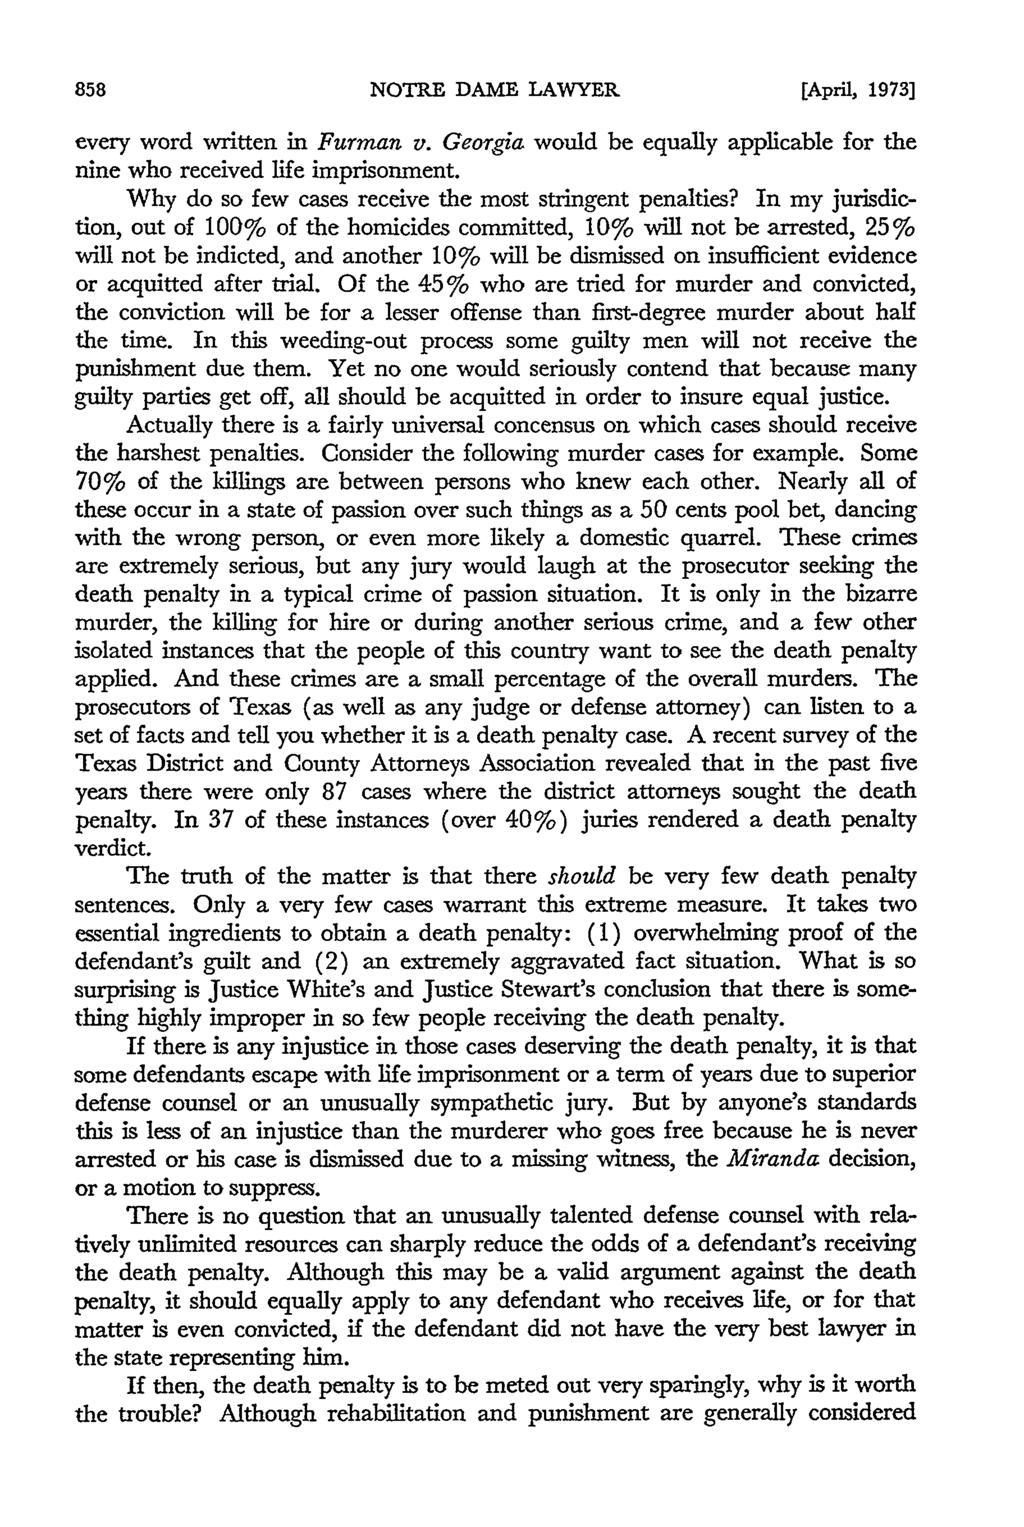 NOTRE DAME LAWYER [April, 1973] every word written in Furman v. Georgia would be equally applicable for the nine who received life imprisonment.